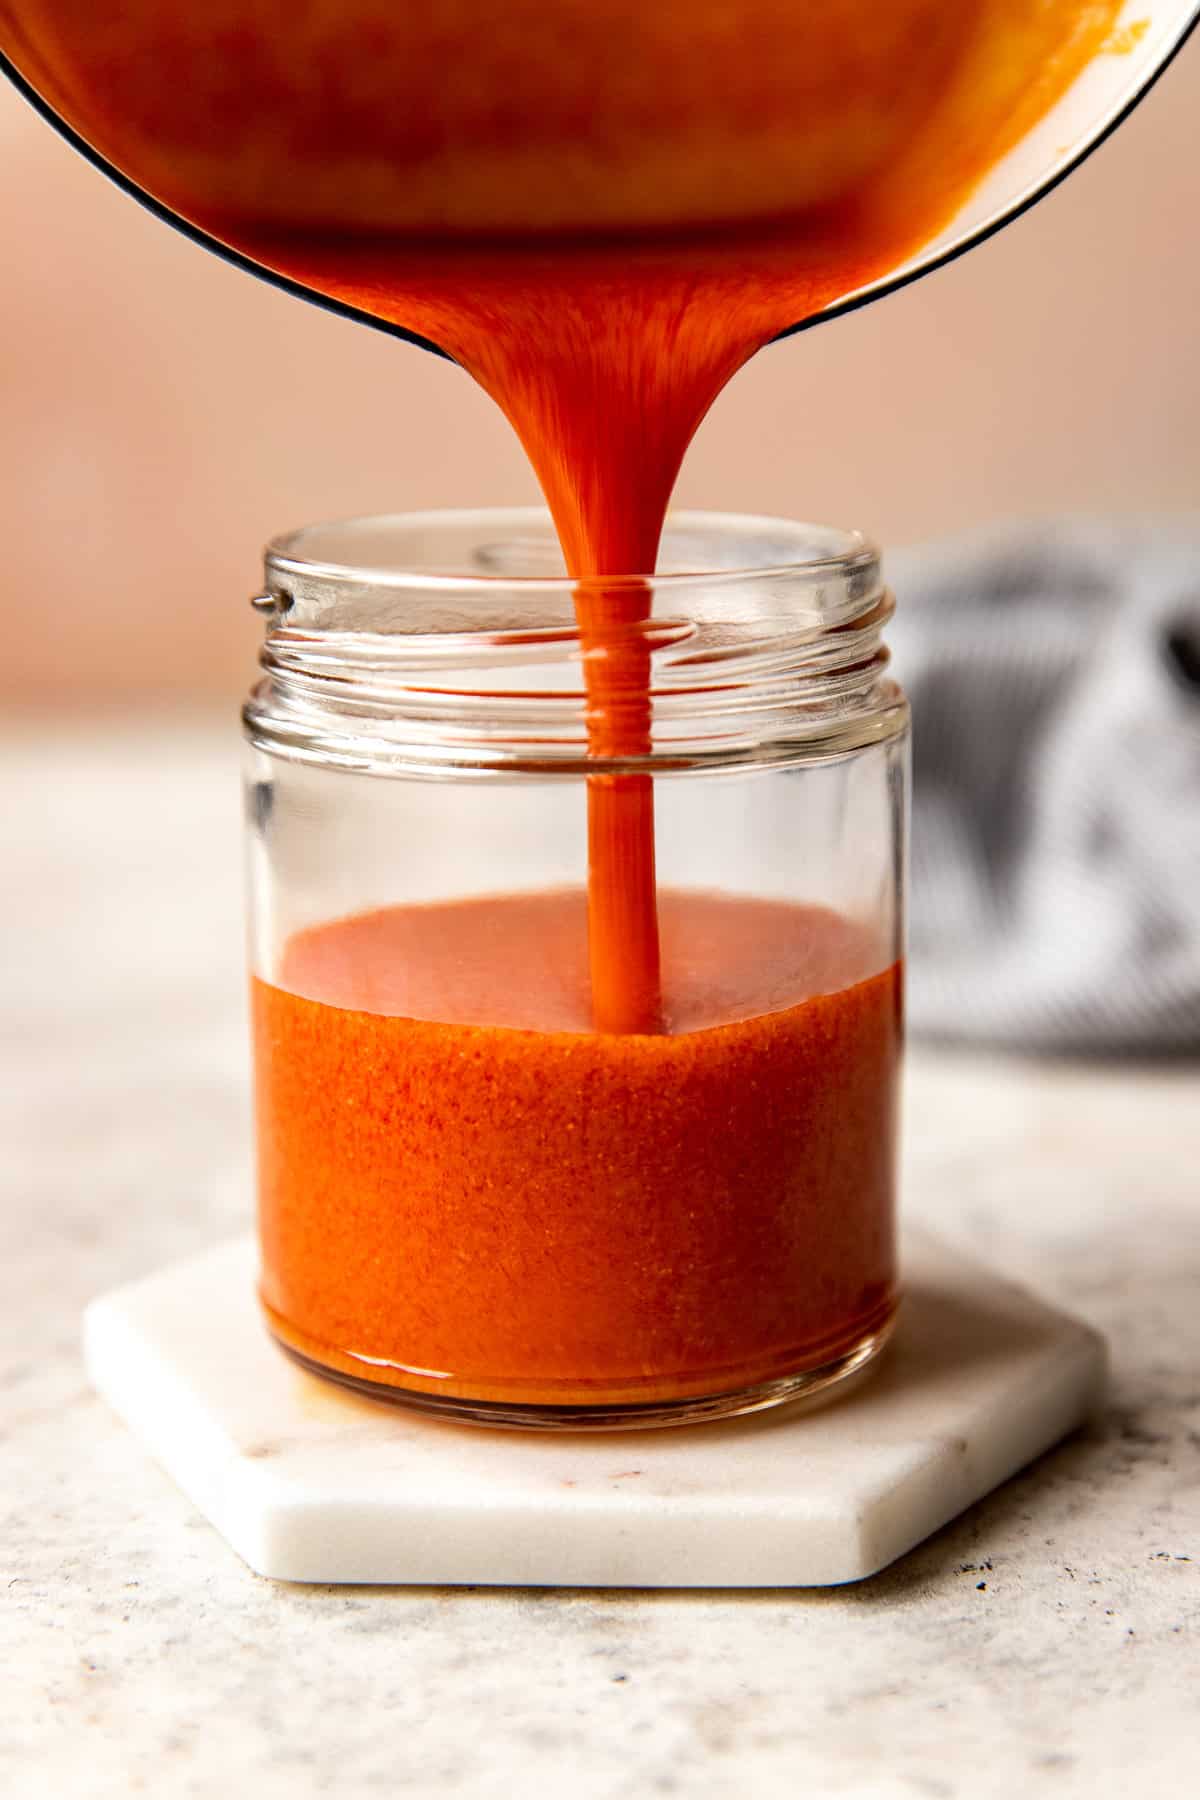 sauce being poured into jar